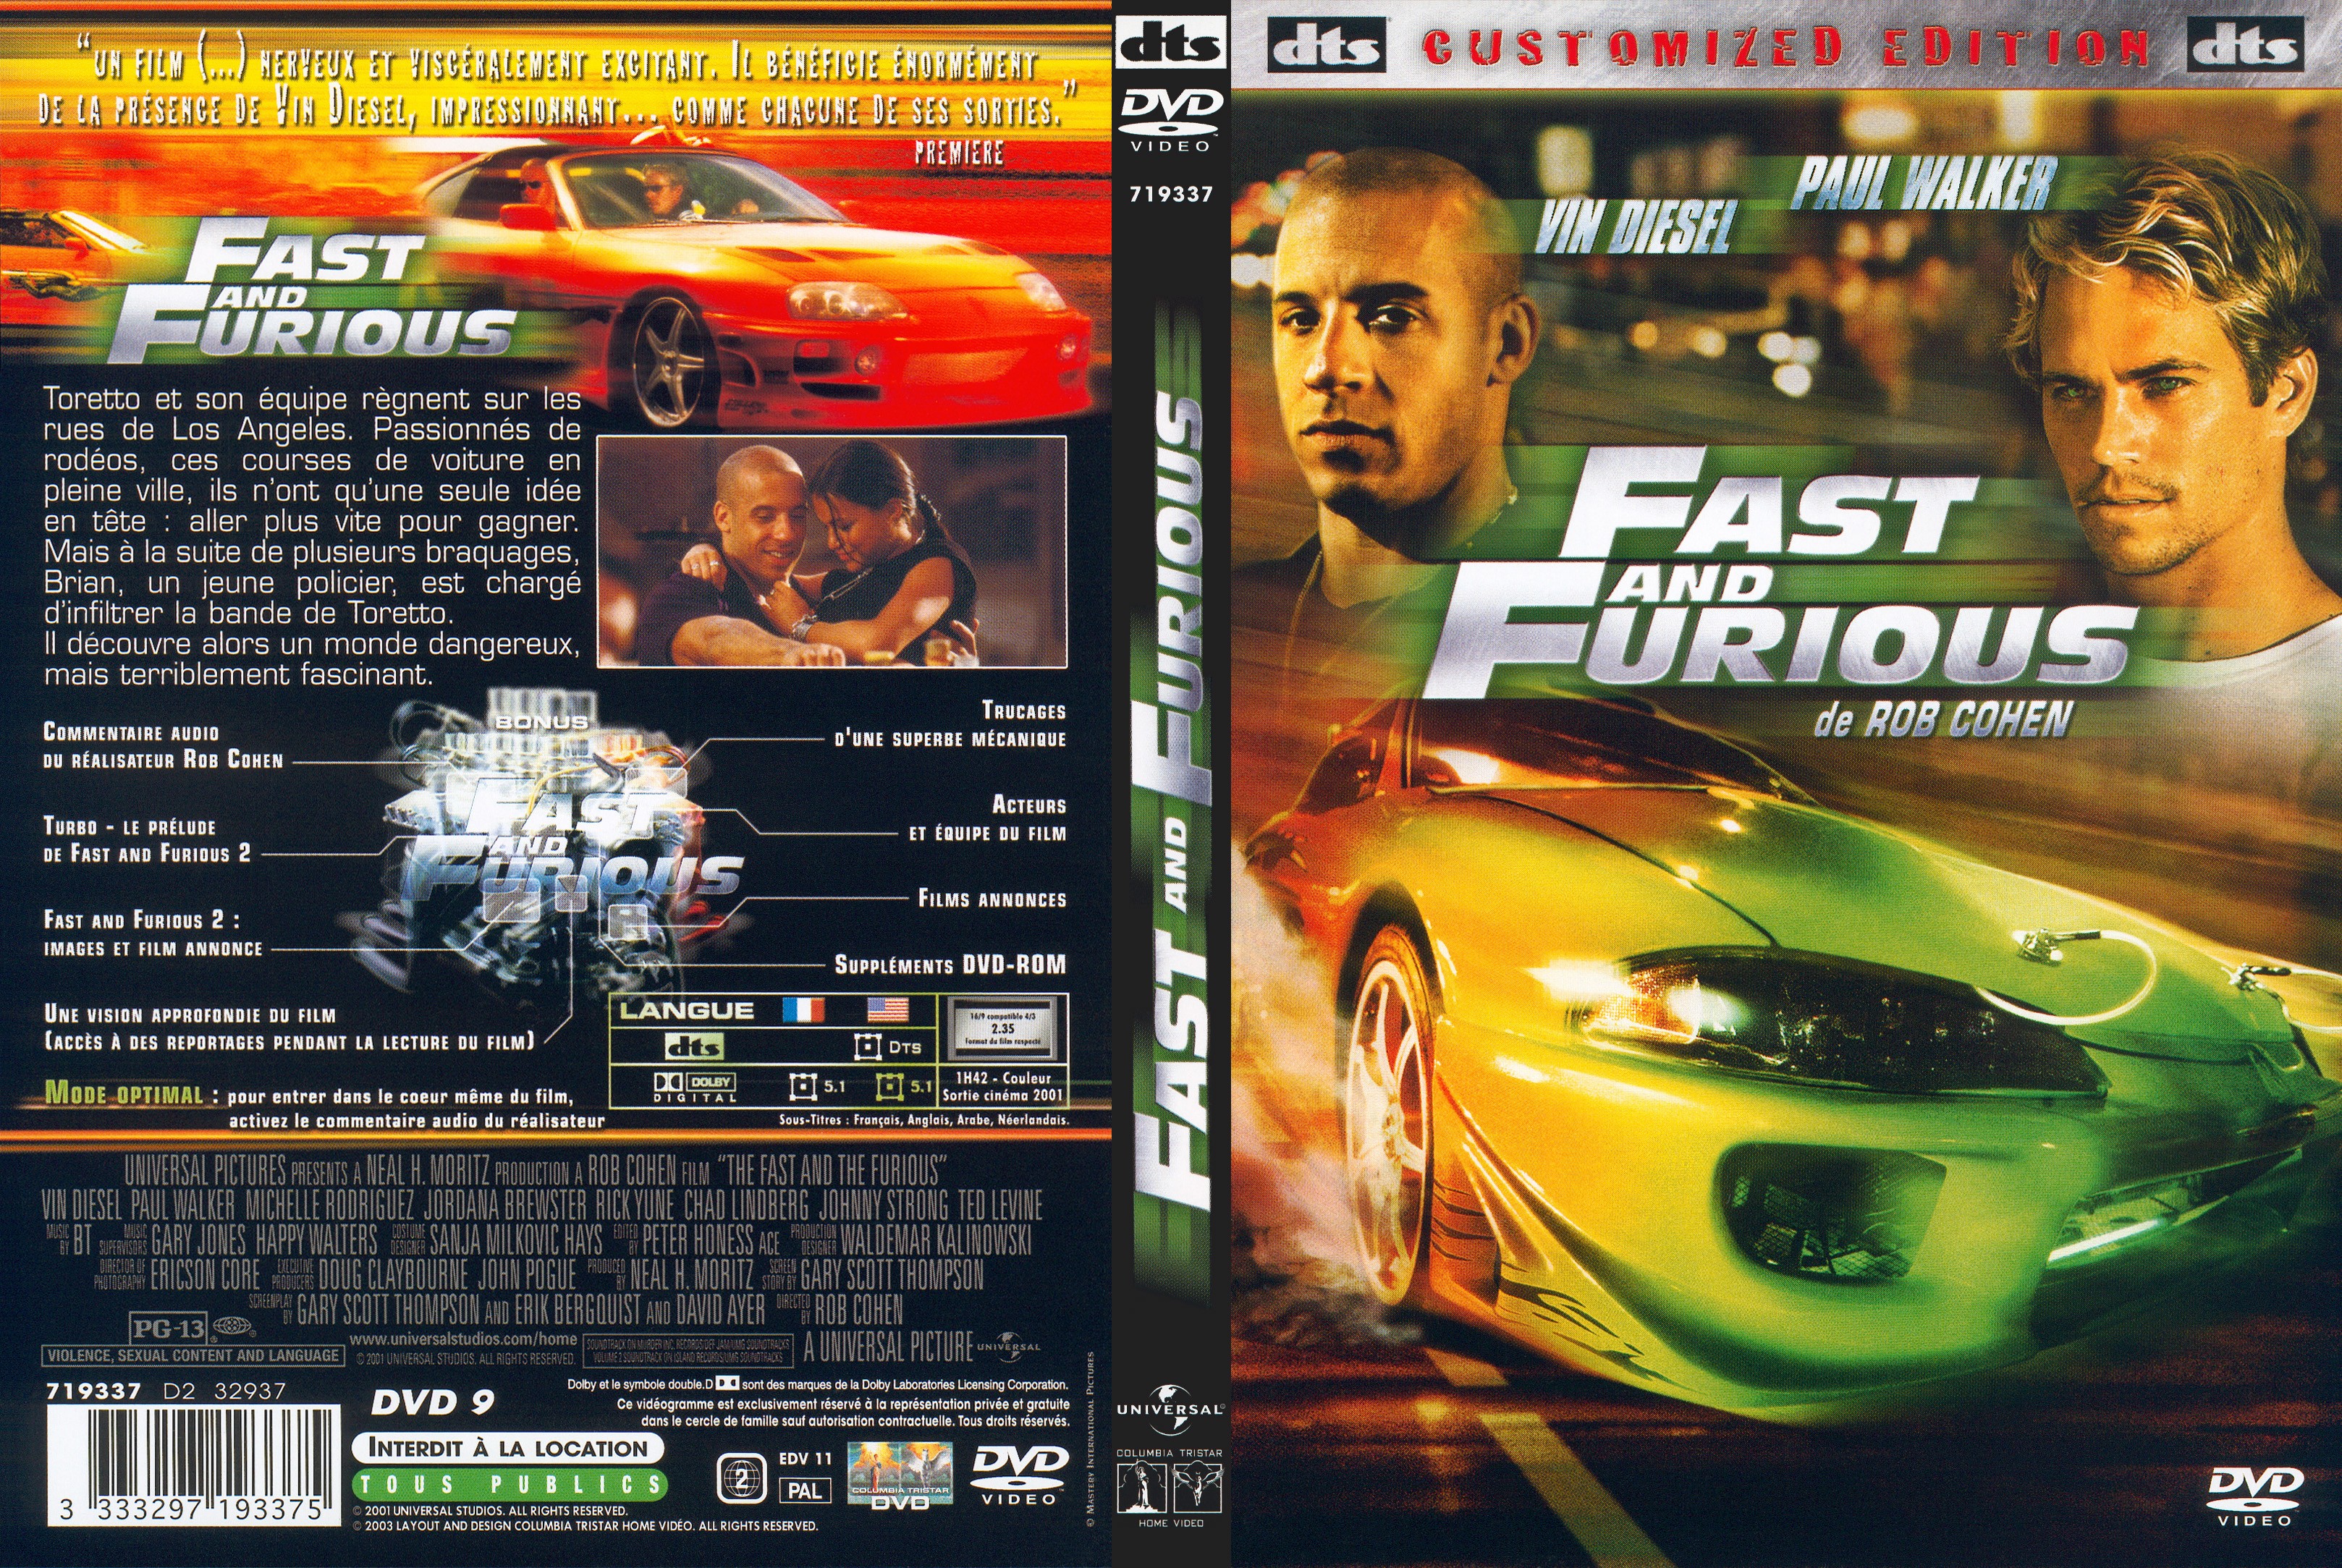 Jaquette DVD Fast and furious